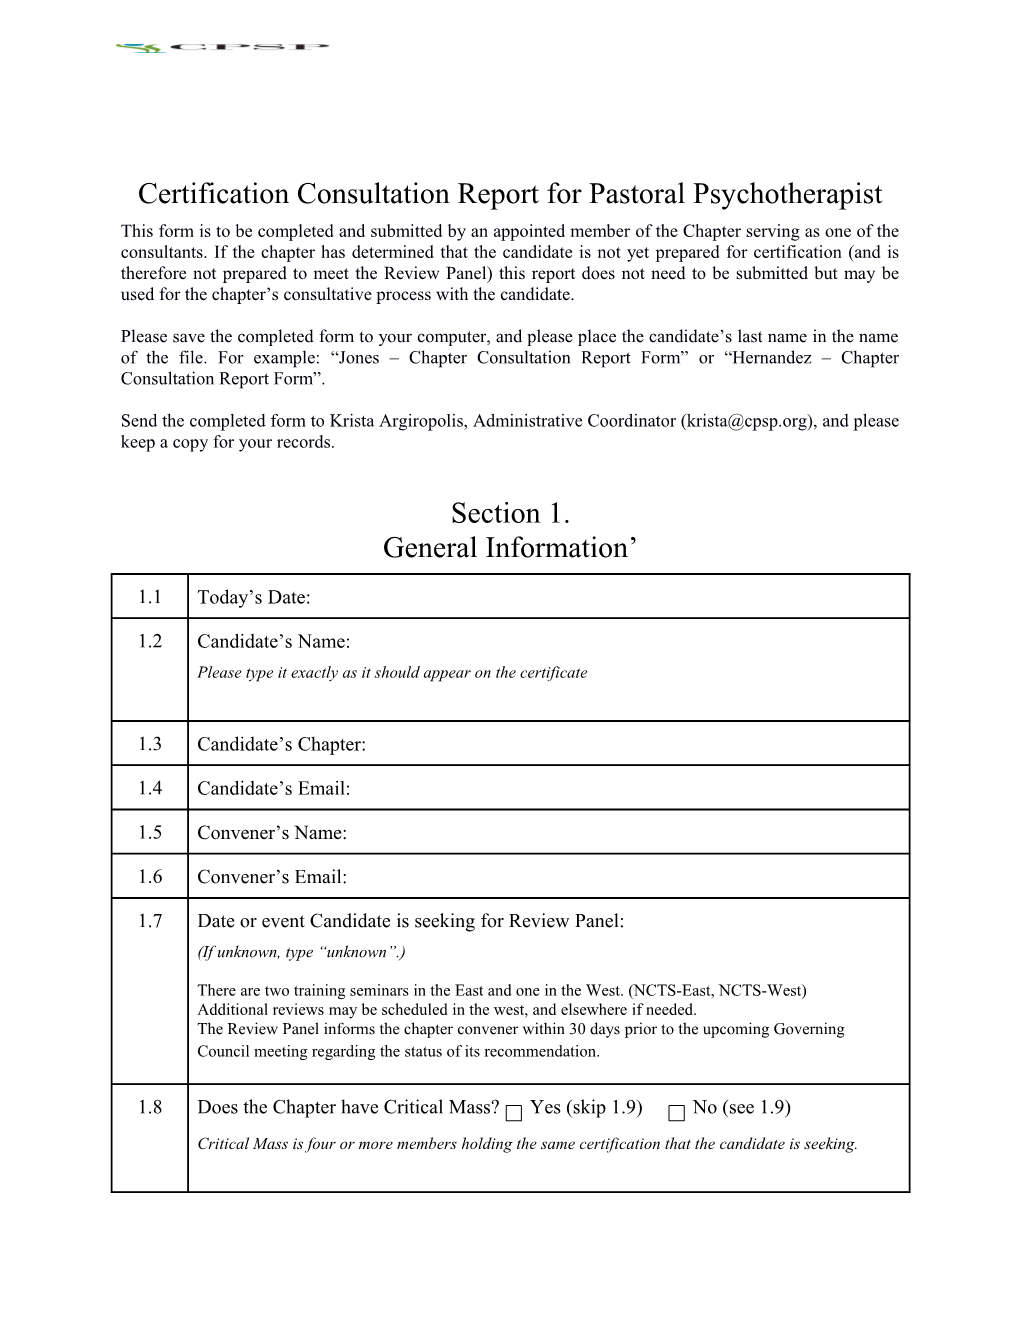 Certification Consultation Report for Pastoral Psychotherapist